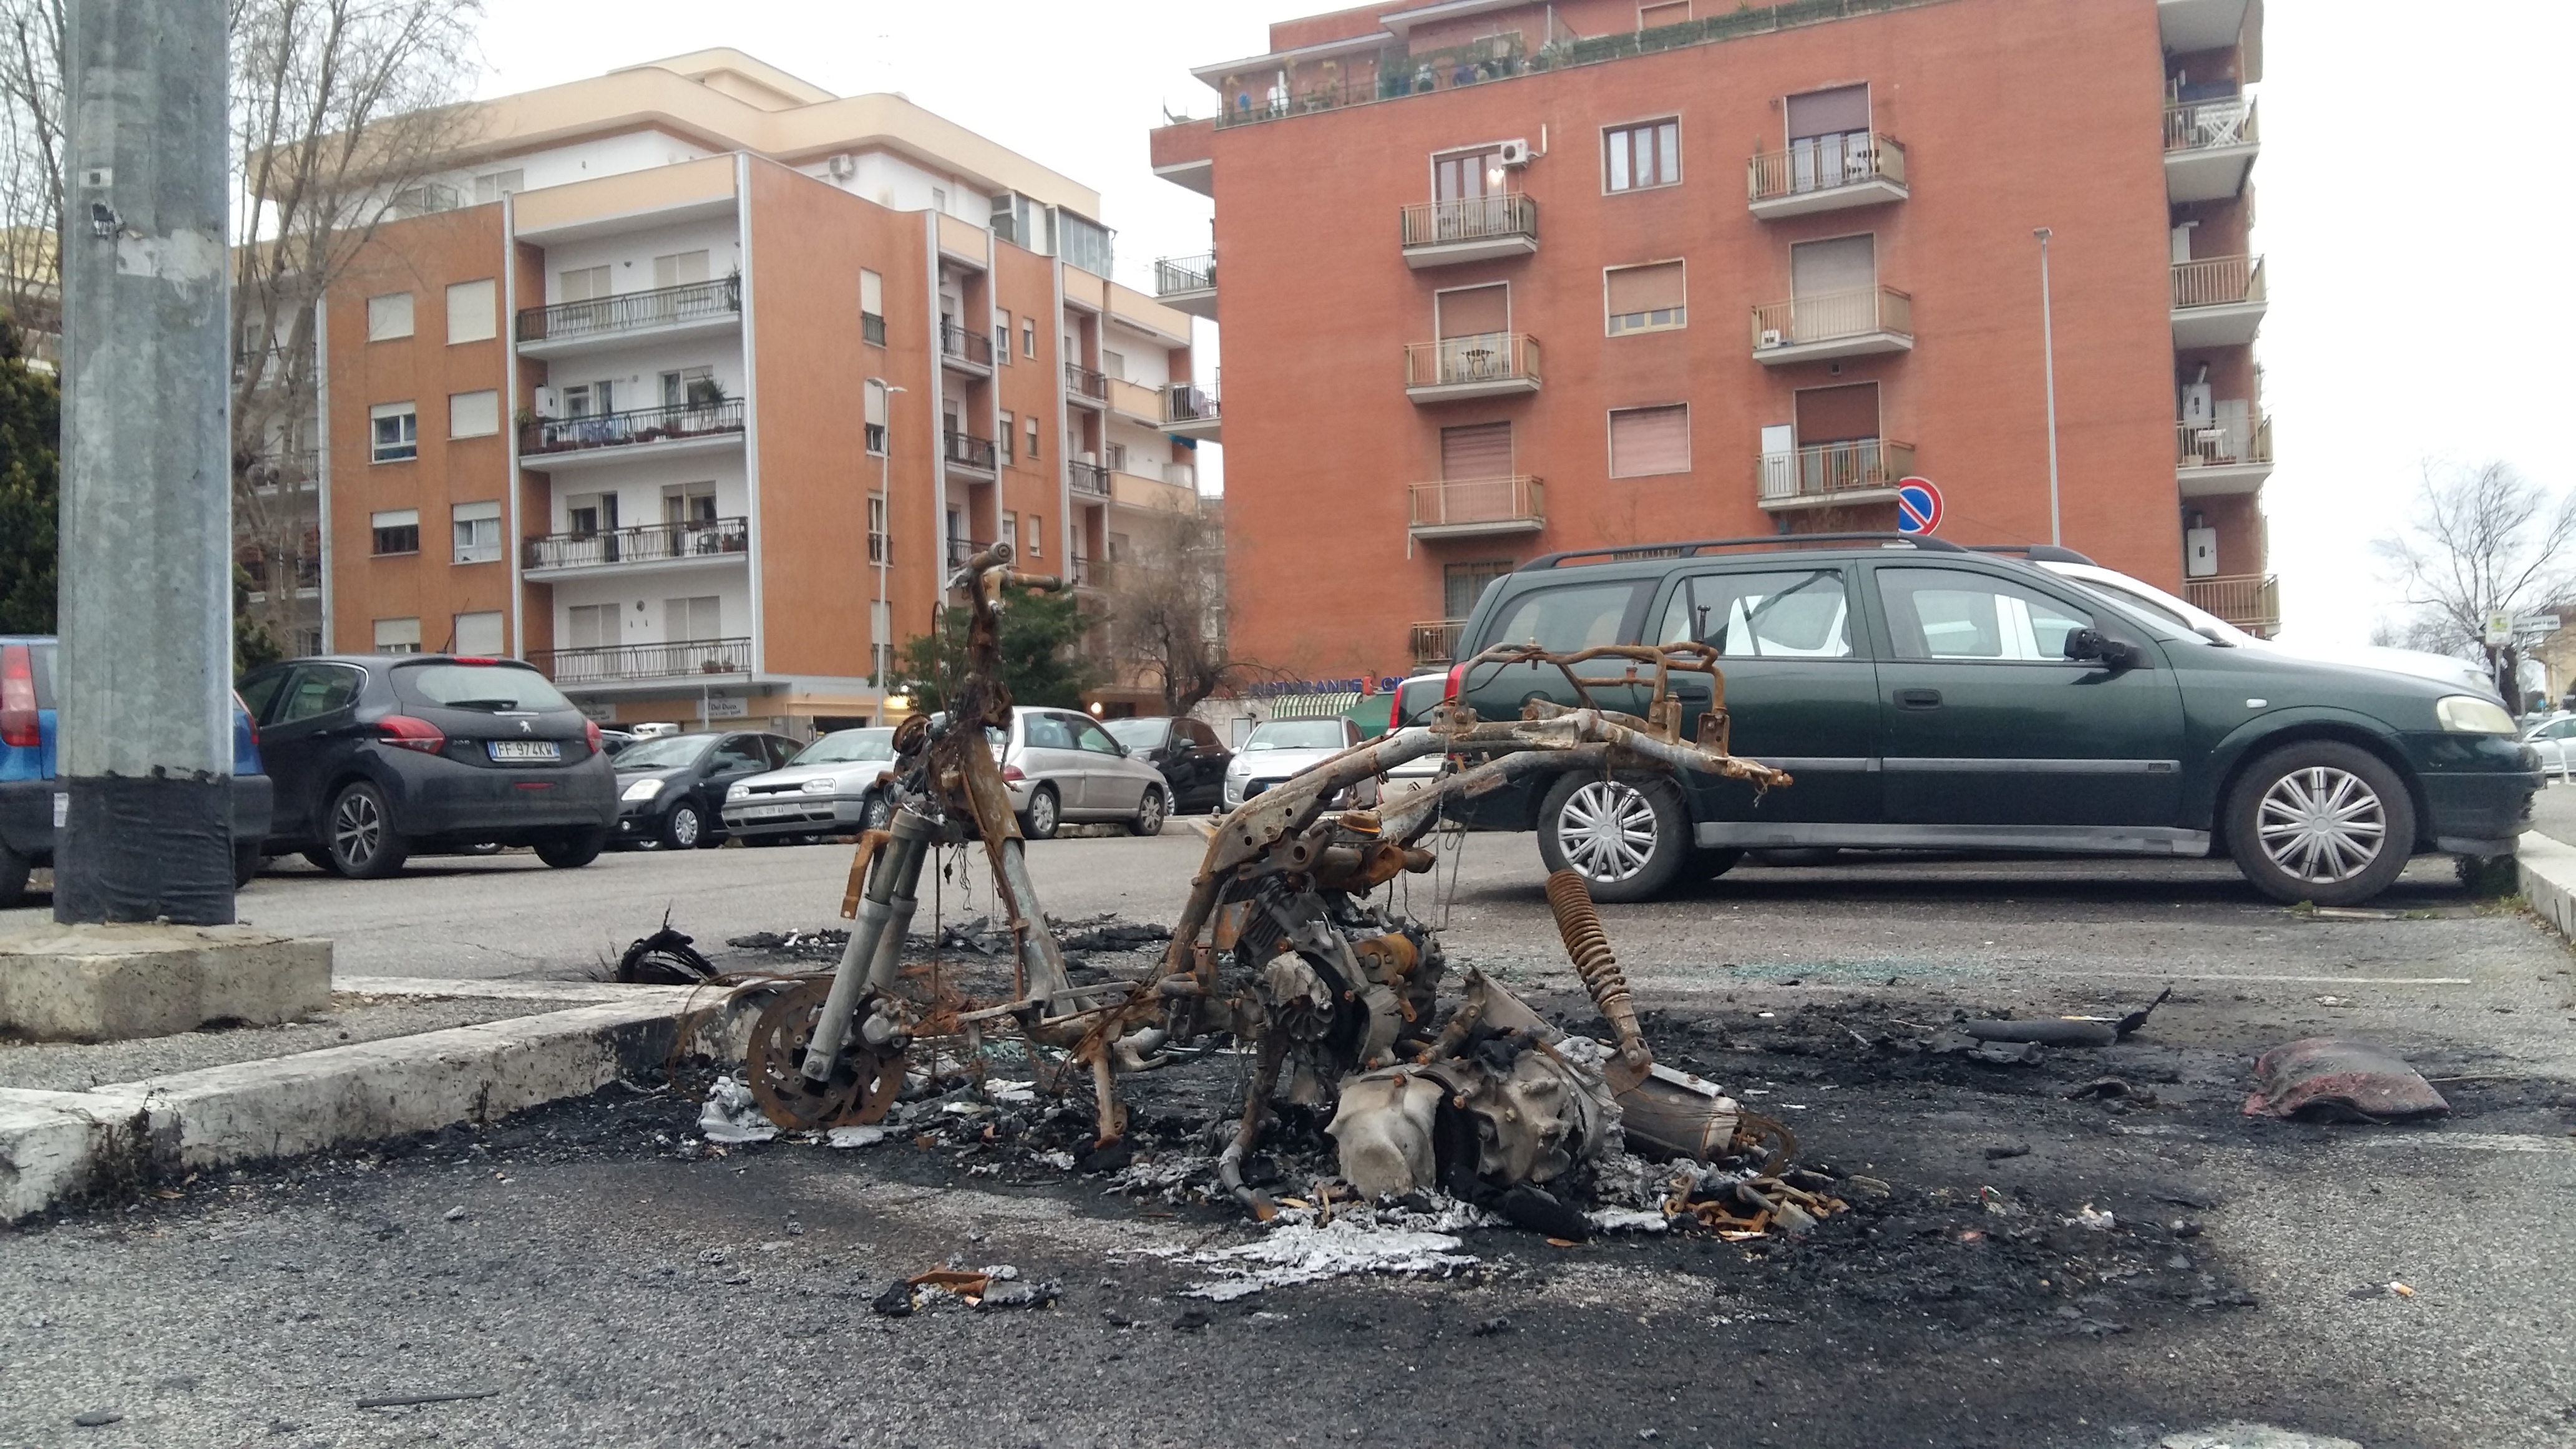 Lo scooter dato alle fiamme in piazza M.V. Agrippa